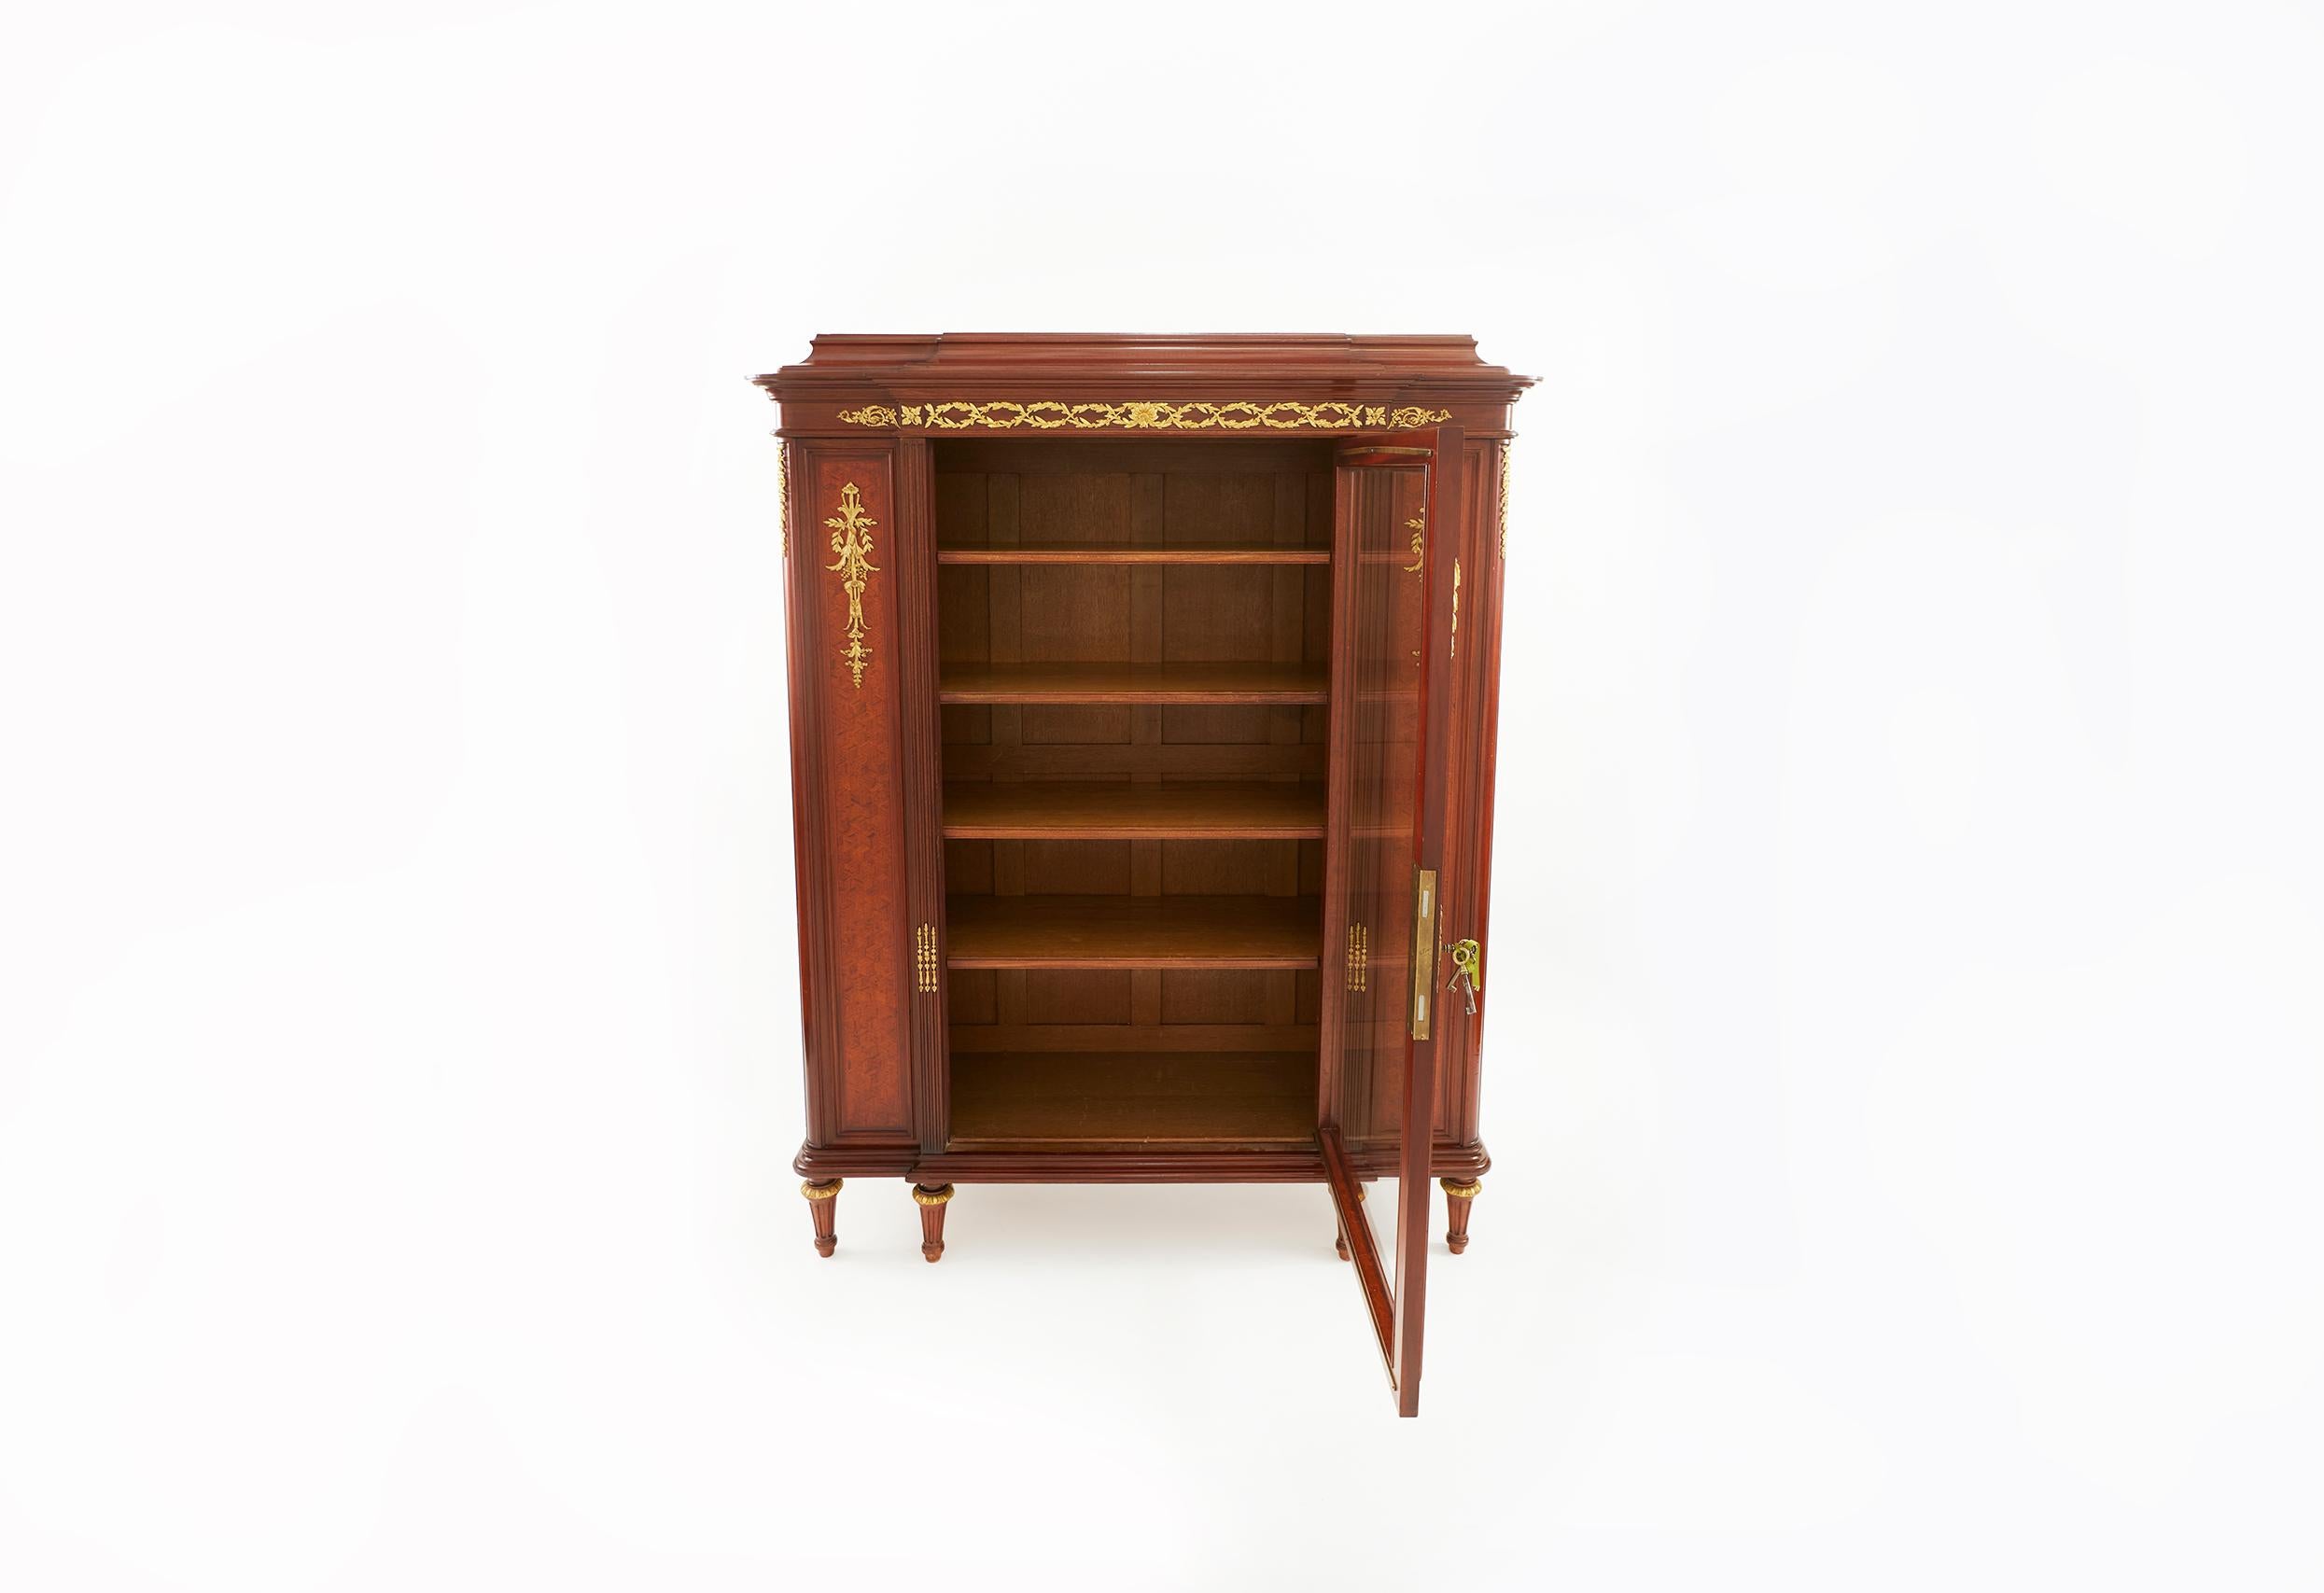 Mahogany bronze mounted detail parquetry / breakfront display cabinet / vitrine with four wooden shelves , supported by six tapering reeded legs . The cabinet / vitrine is in good condition . Minor wear consistent with age / use . The parquetry